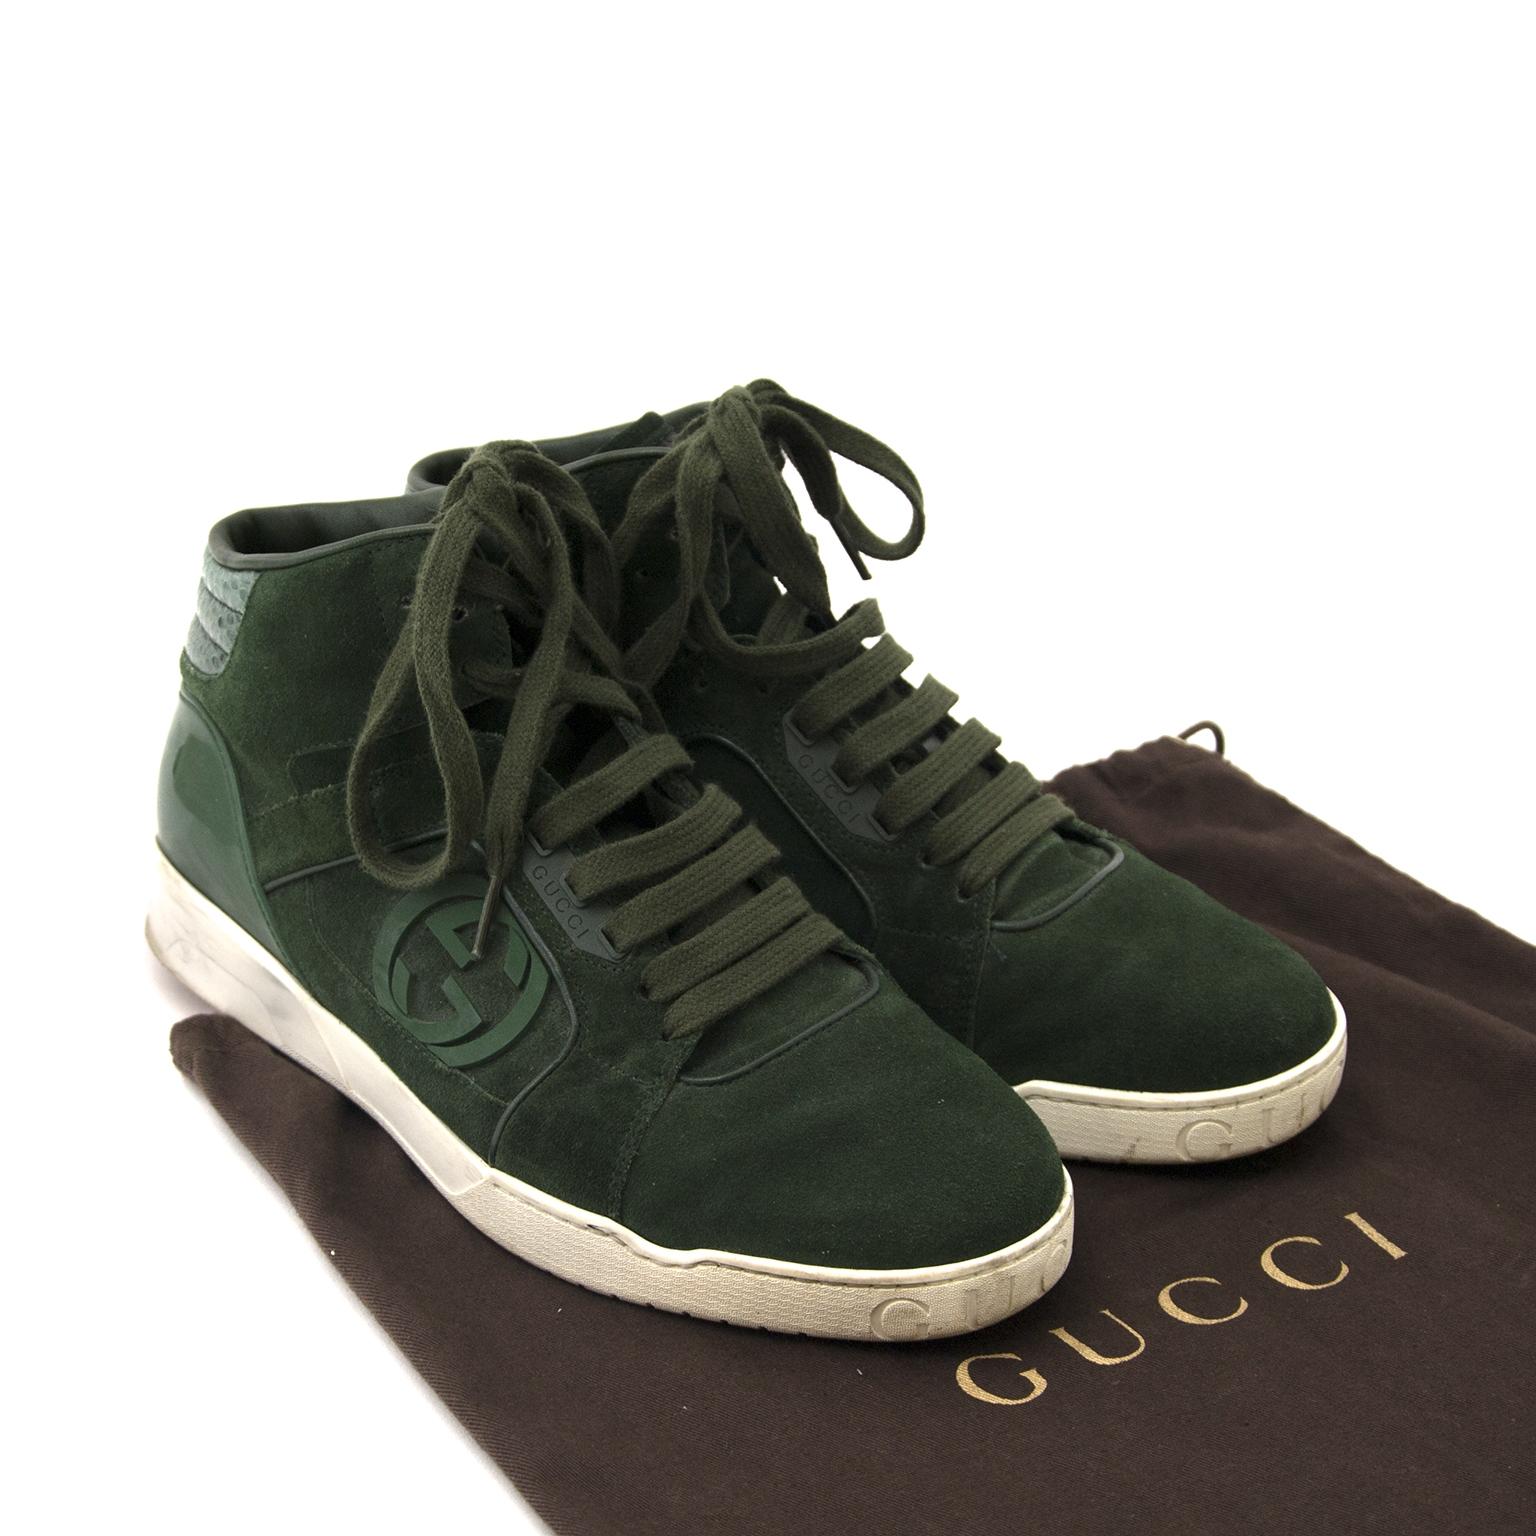 Good condition

Estimated Retail Price: €450

Gucci Men's Green Hitop Trainer with Interlocking G Detail - size EU41

The perfect trainers for men or women on the go? Found them! These dark green suede sneakers feature snake print and vinyl leather